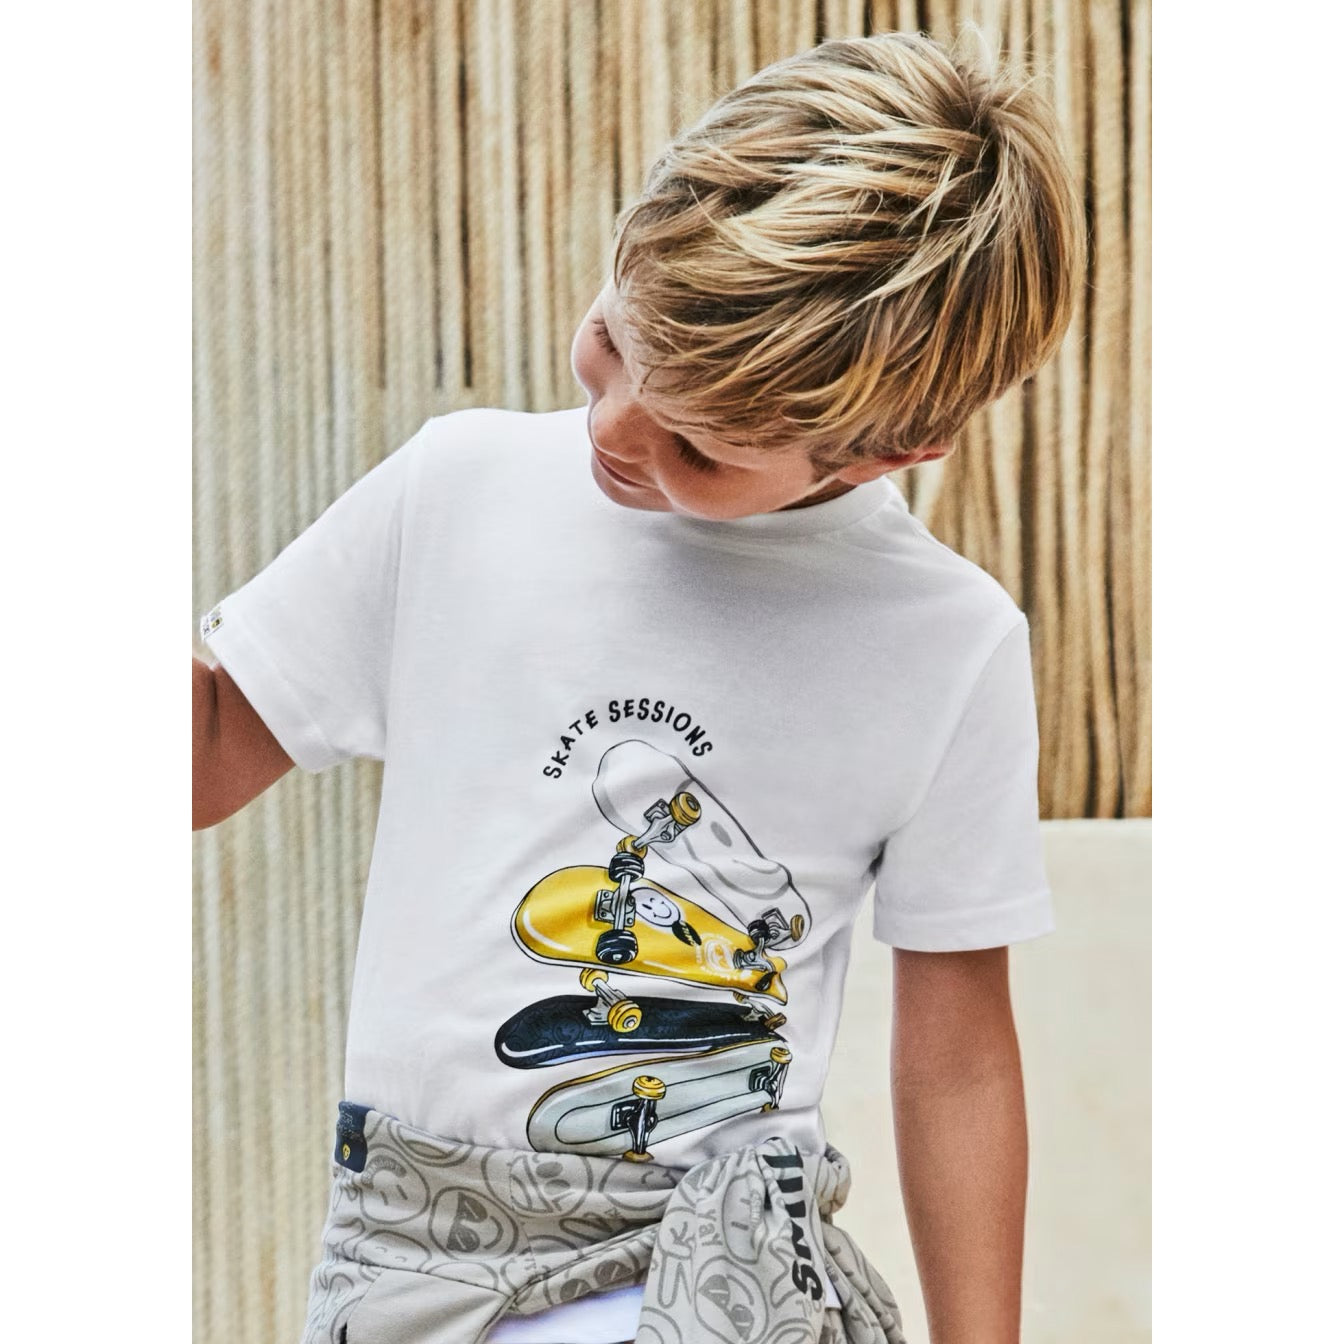 Mayoral Boys Skate Sessions T-Shirt 3017 Clothing 5YRS / White,6YRS / White,7YRS / White,8YRS / White,9YRS / White